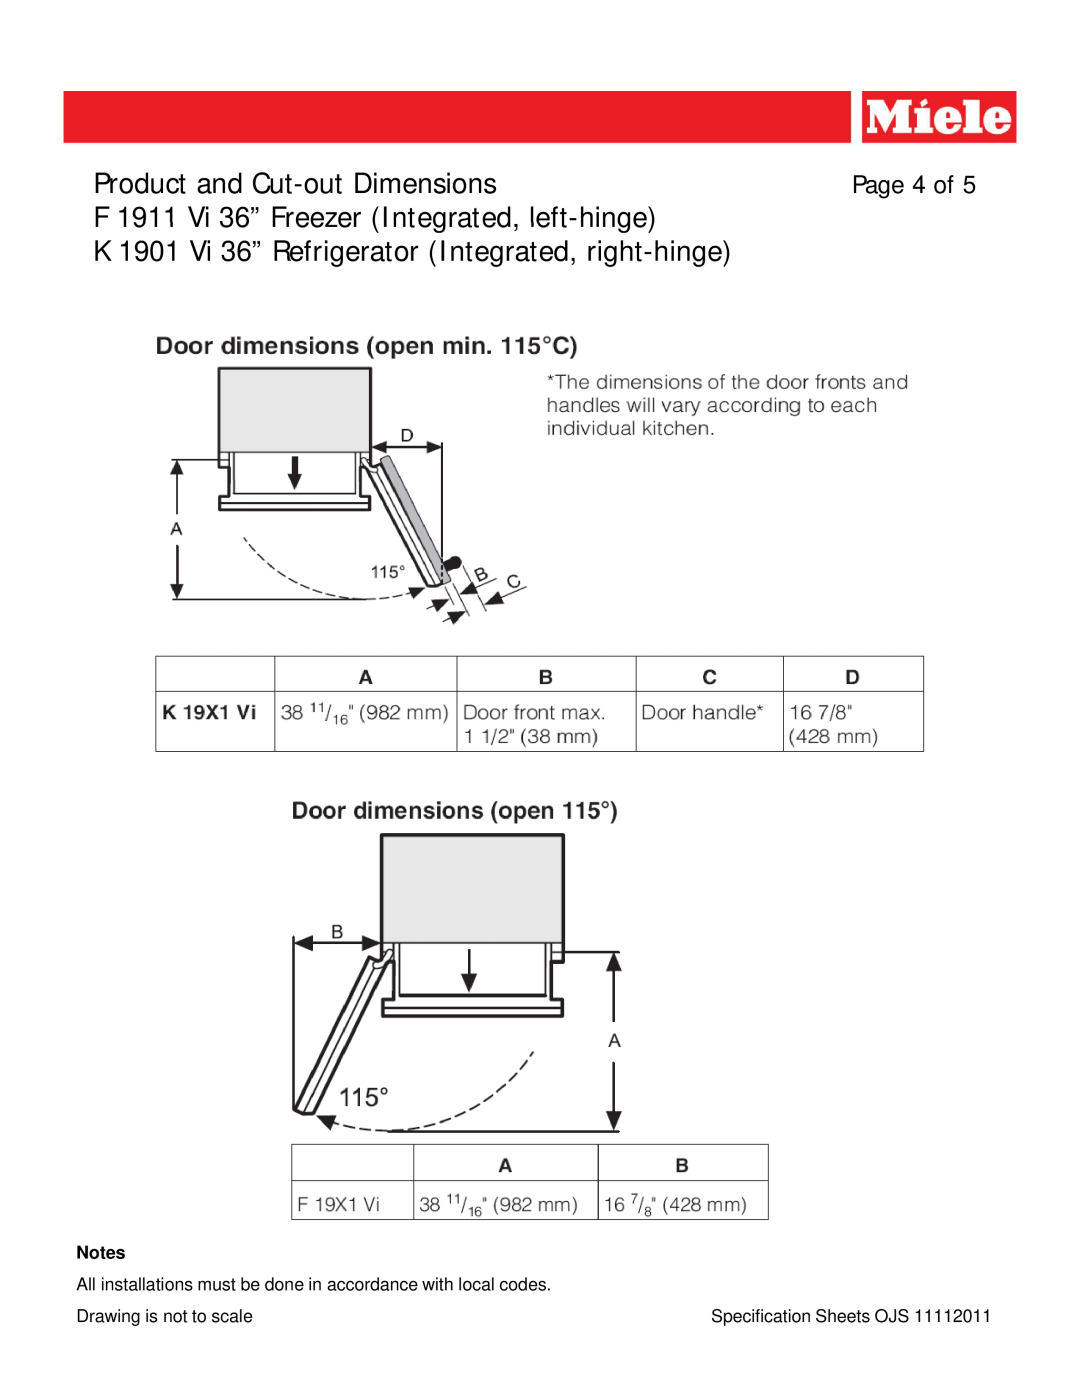 Miele F 1911 VI 36, K 1901 VI 36 Page 4 of, Product and Cut-outDimensions, F 1911 Vi 36” Freezer Integrated, left-hinge 